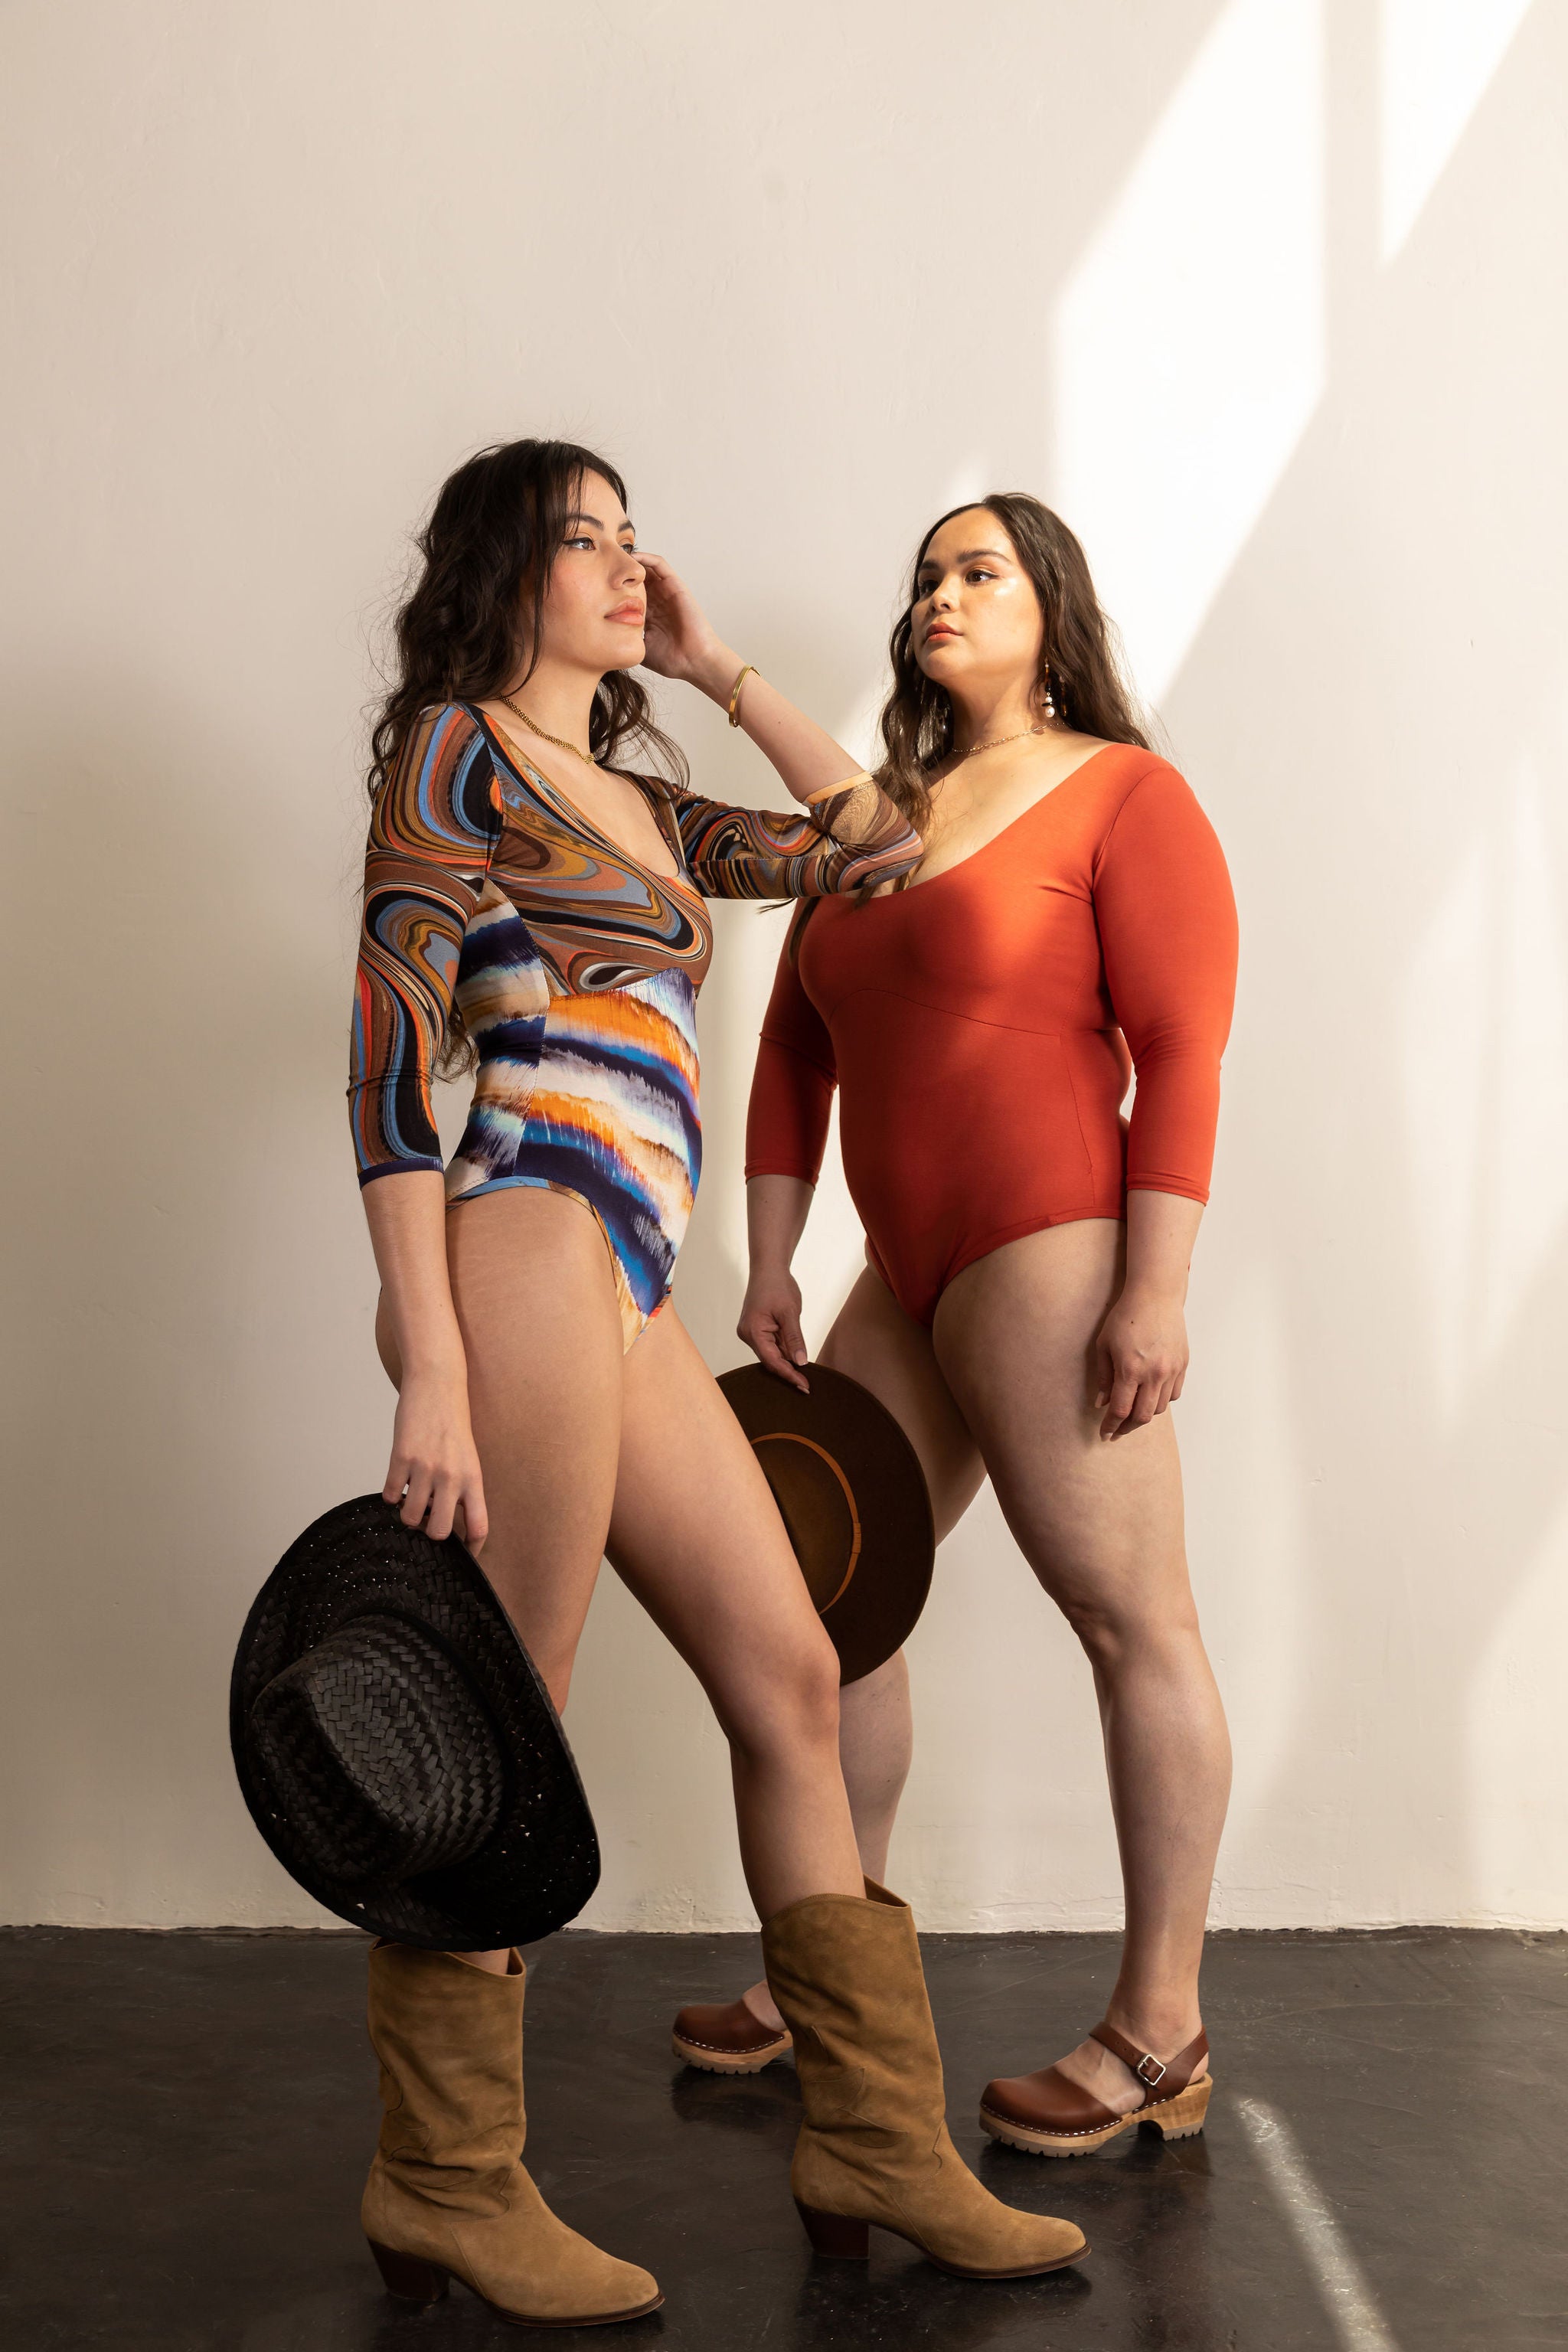 Buy Plus Size Bodysuits for Women Online in South Africa